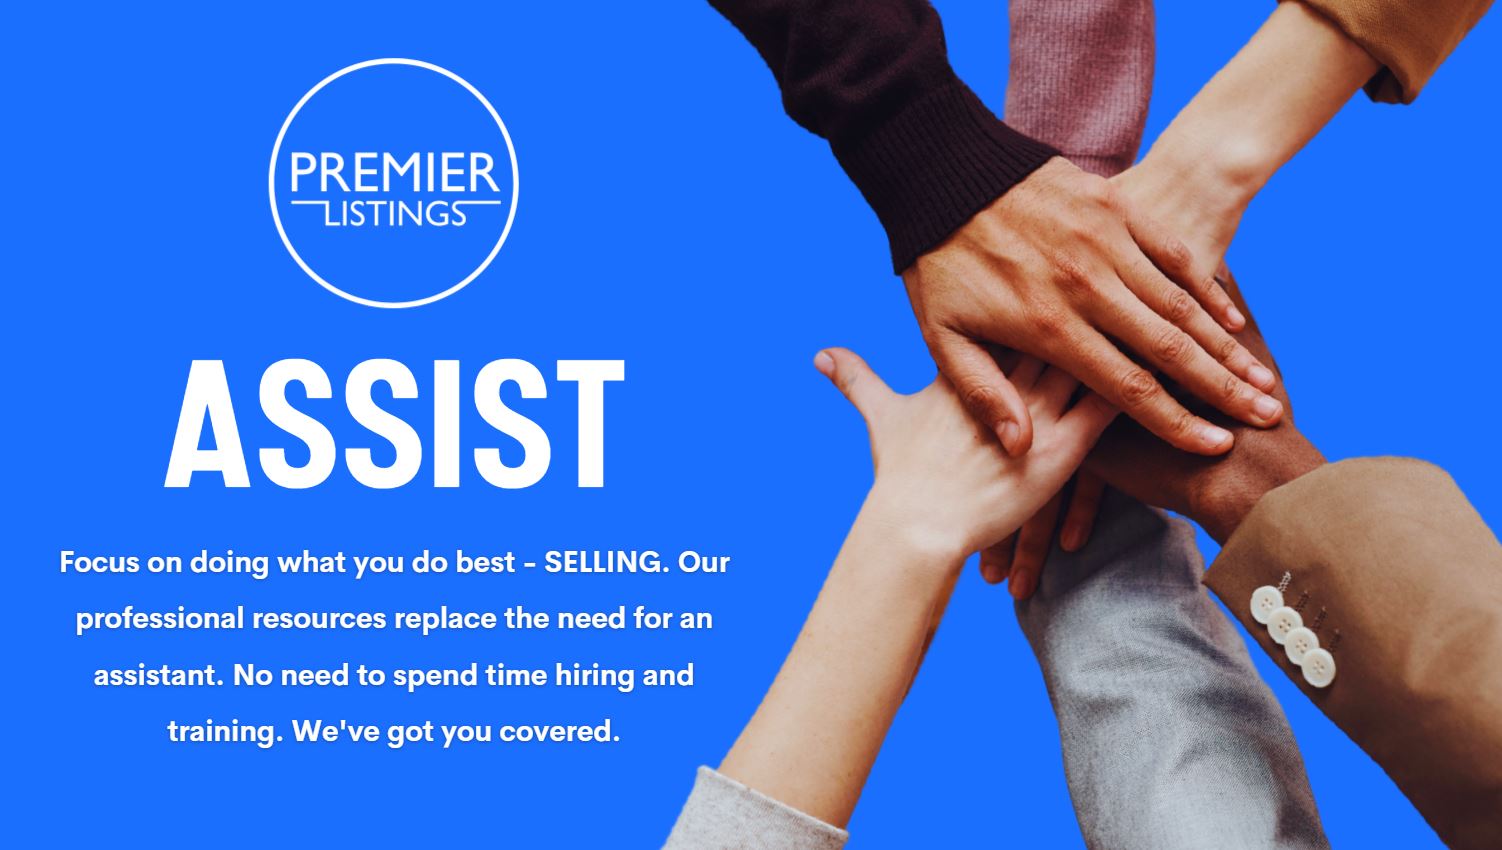 Premier Listings Launches New Program to Assist Top Producing Agents